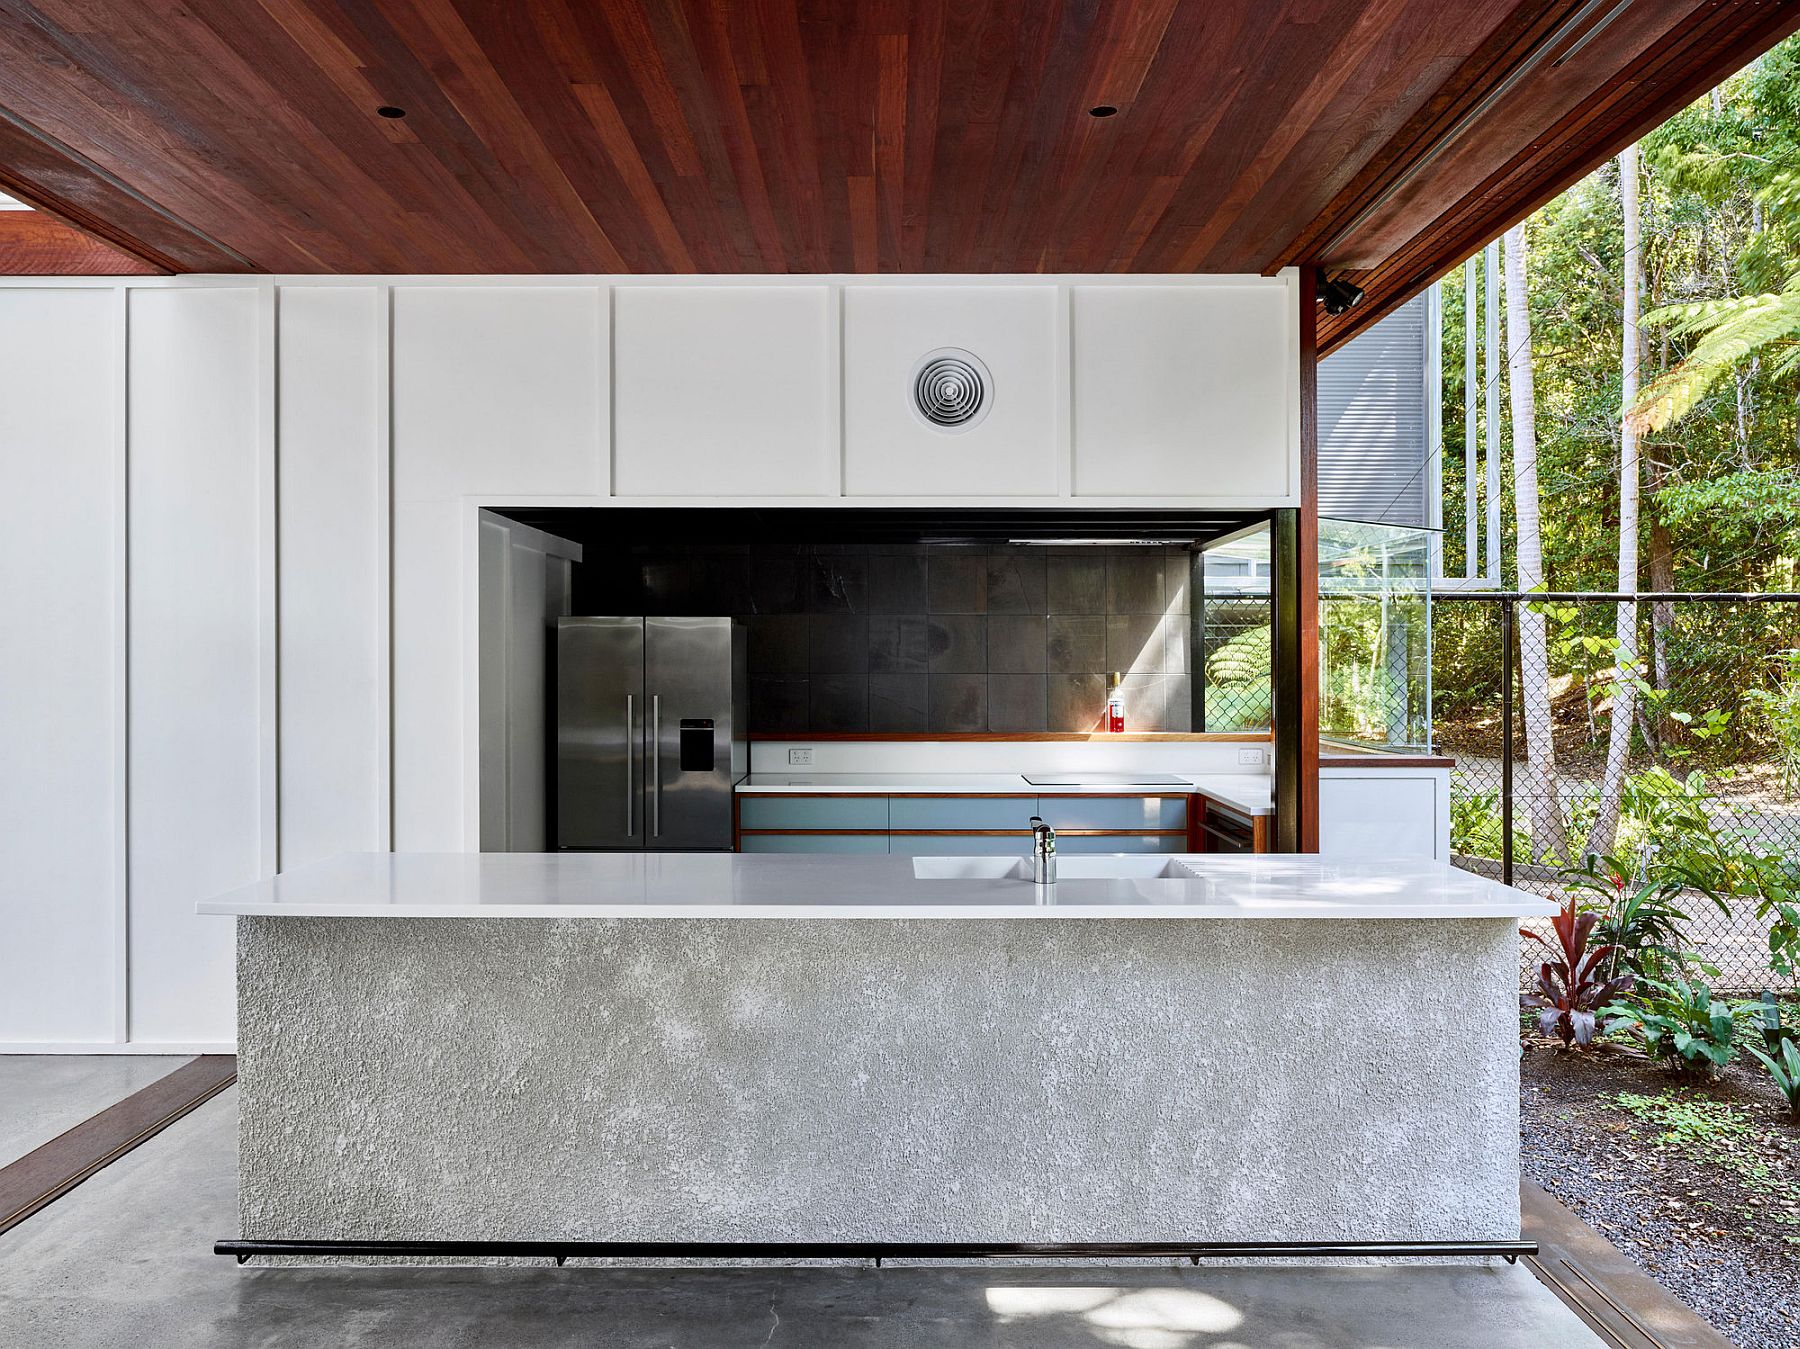 Concrete kitchen island is easy to maintain and clean